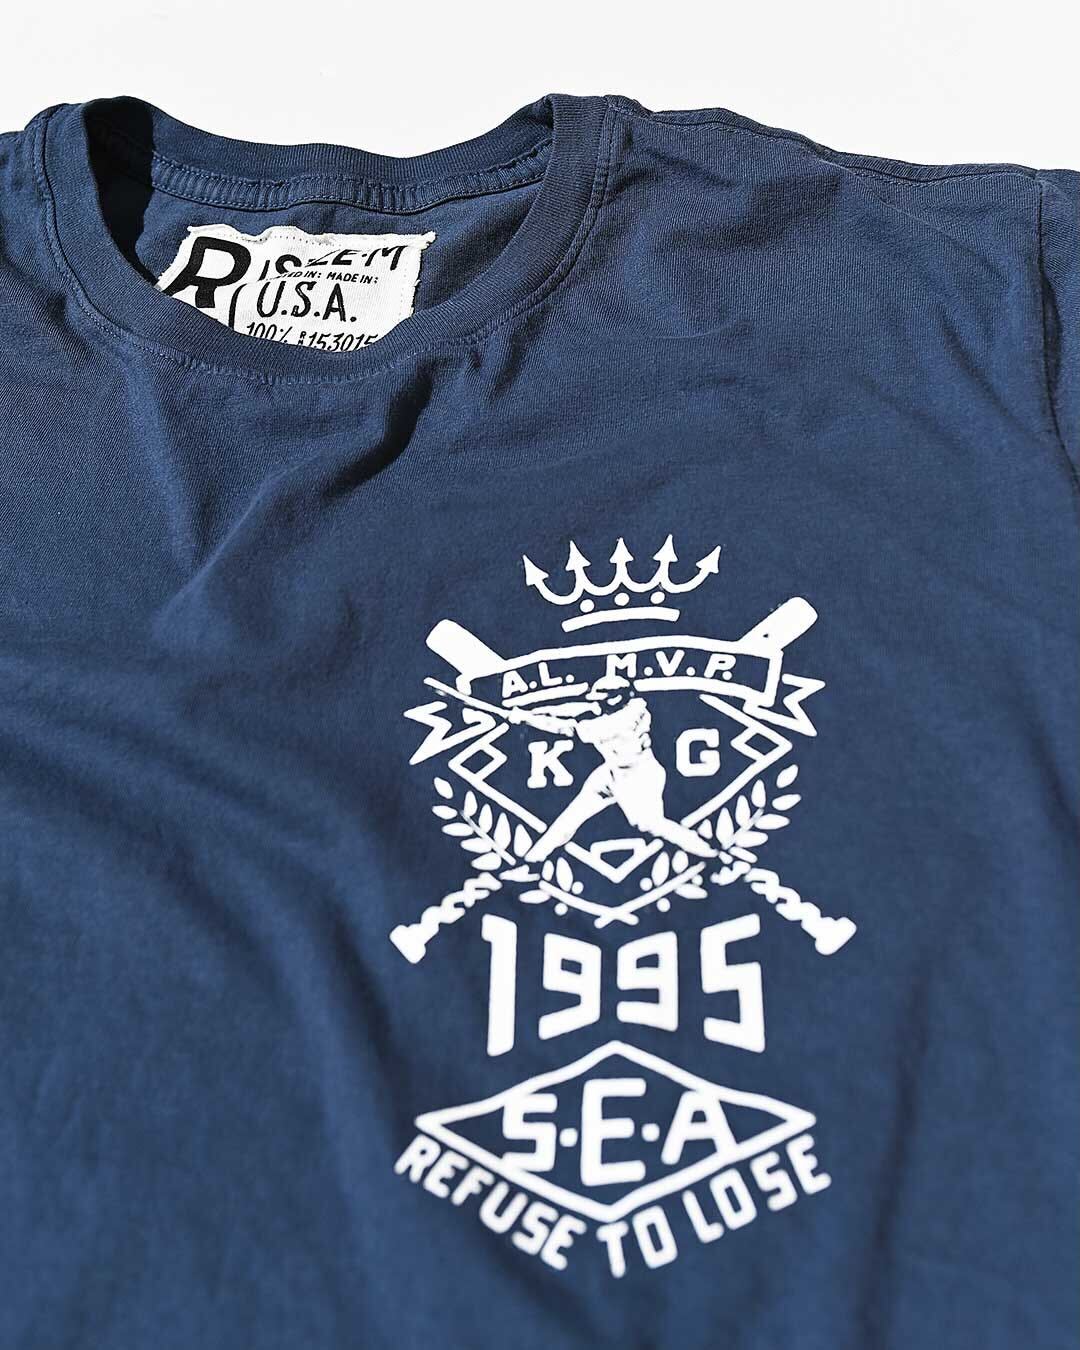 Griffey 1995 Refuse to Lose Navy Tee - Roots of Fight Canada